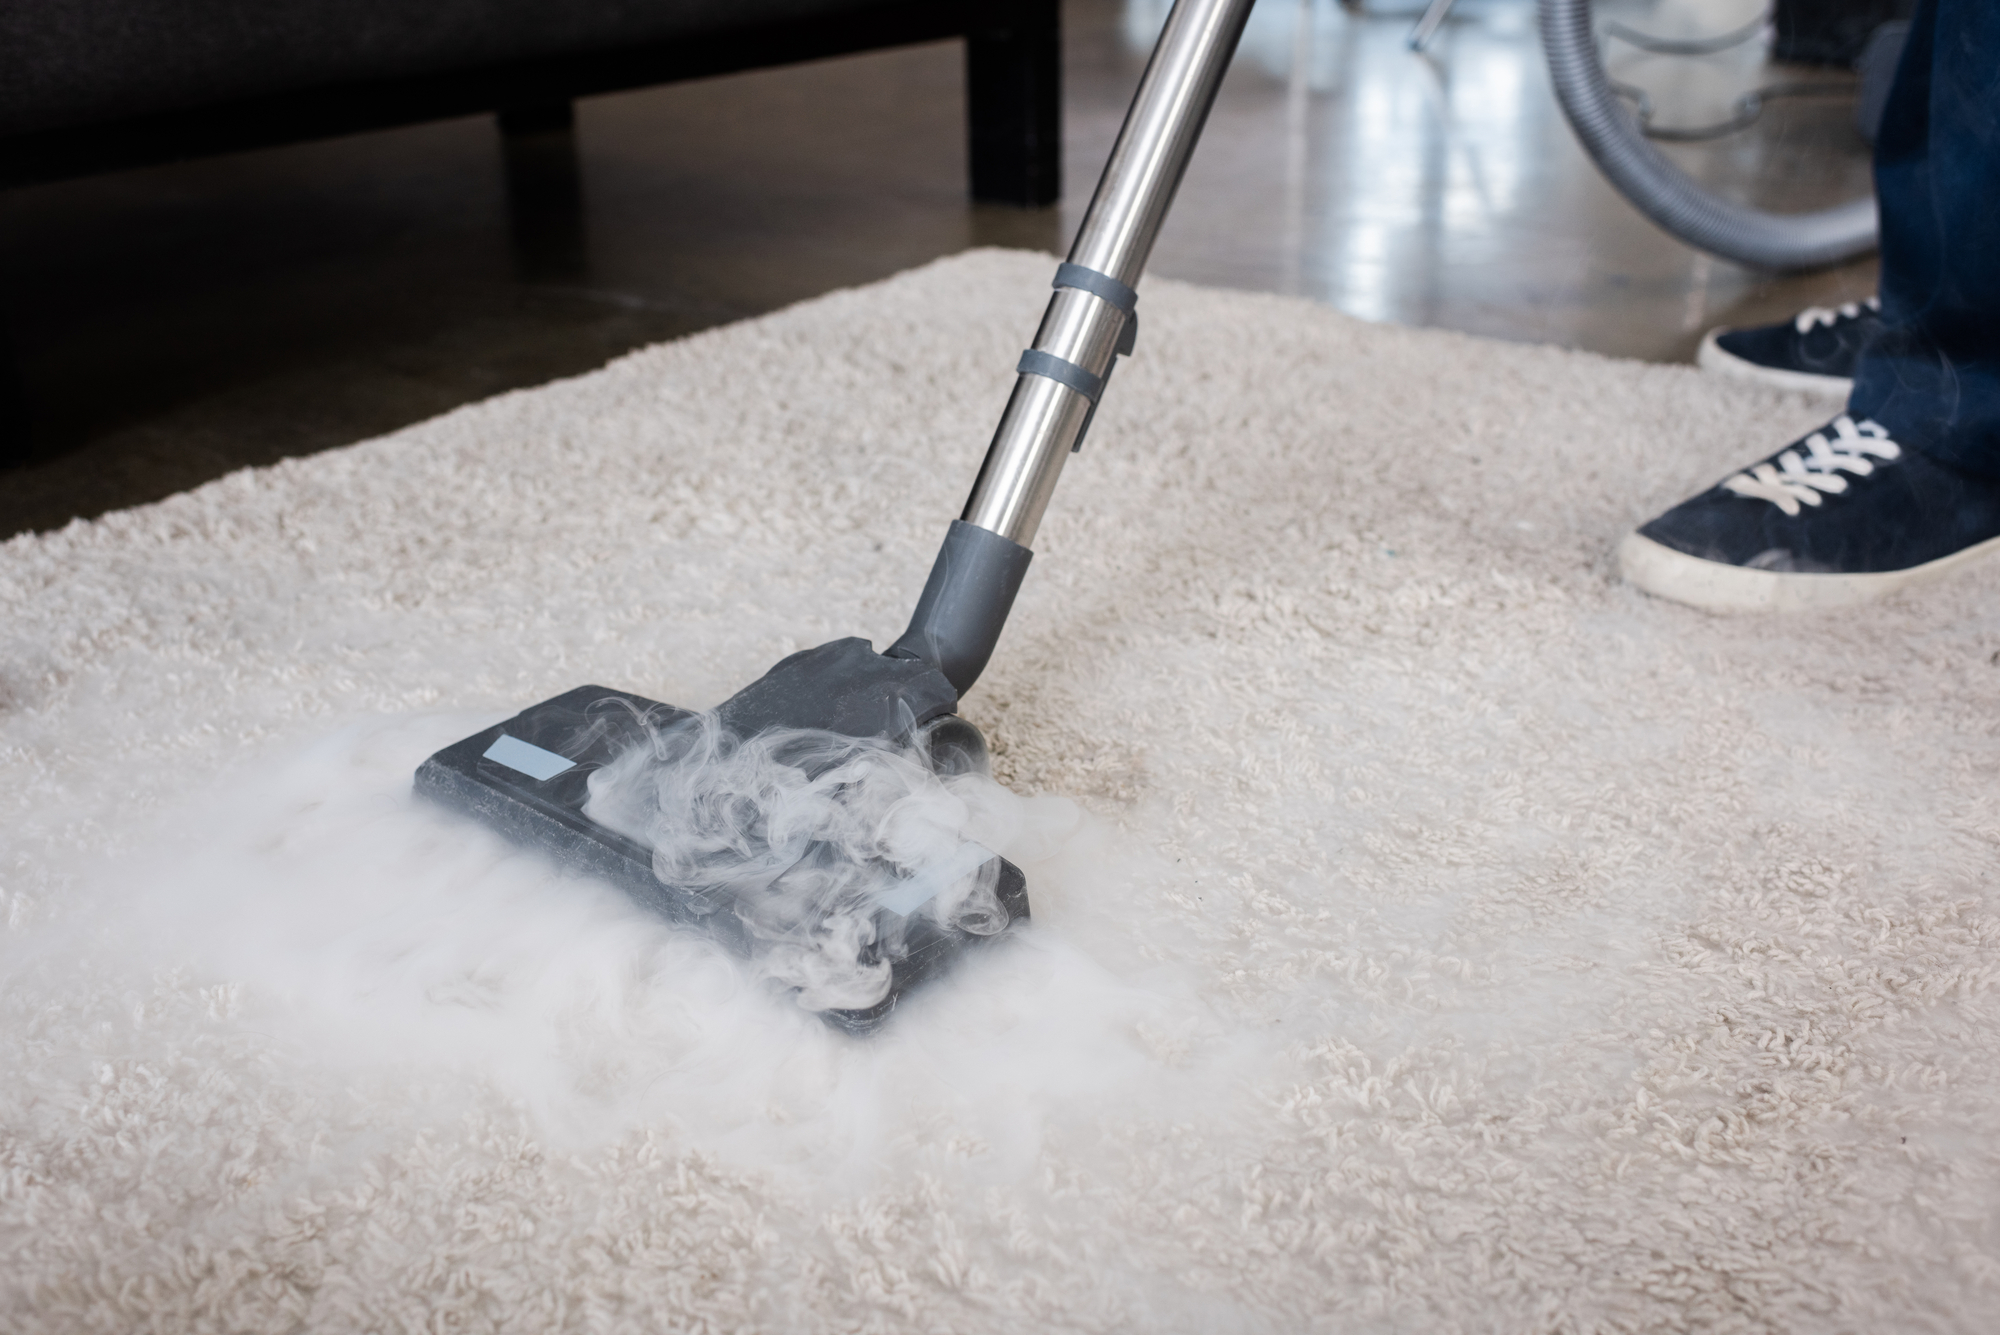 Person wearing black sneakers using a steam cleaner on a beige carpet.